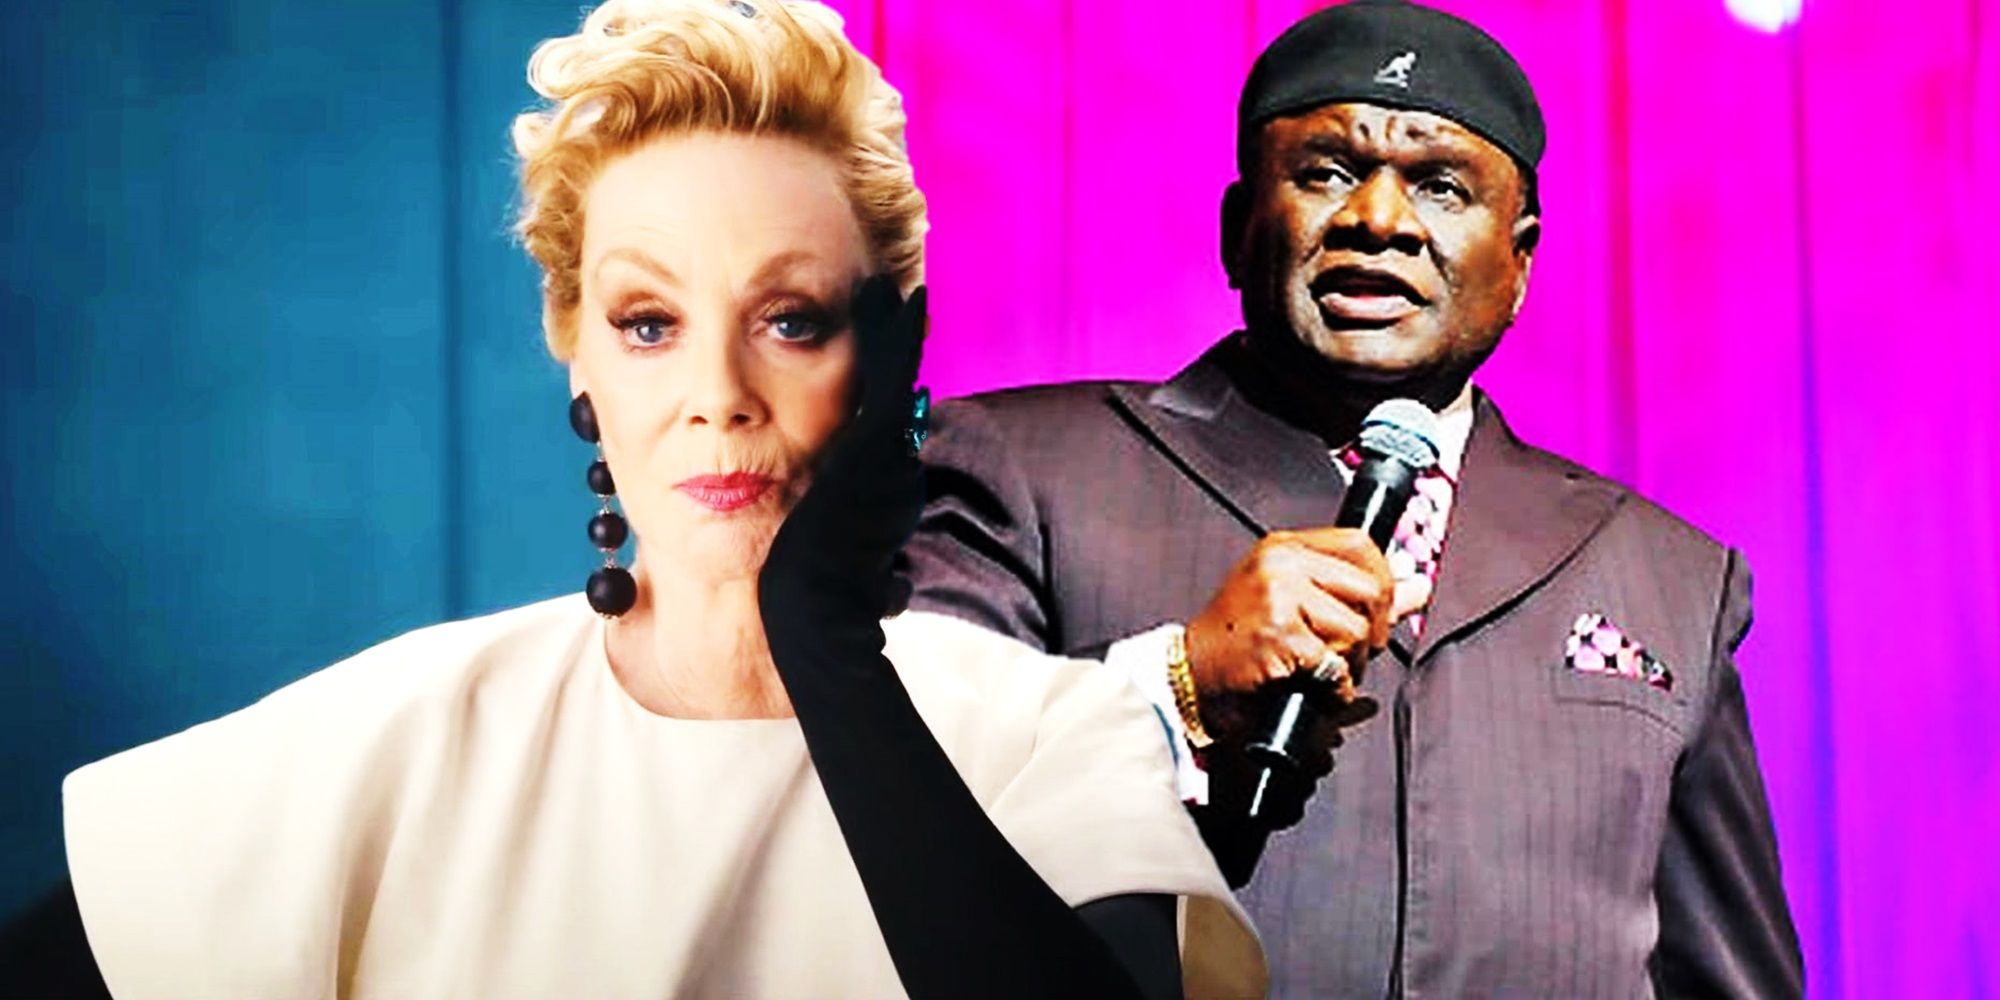 Collage of Jean Smart in Hacks season 3 and George Wallace performing on stage